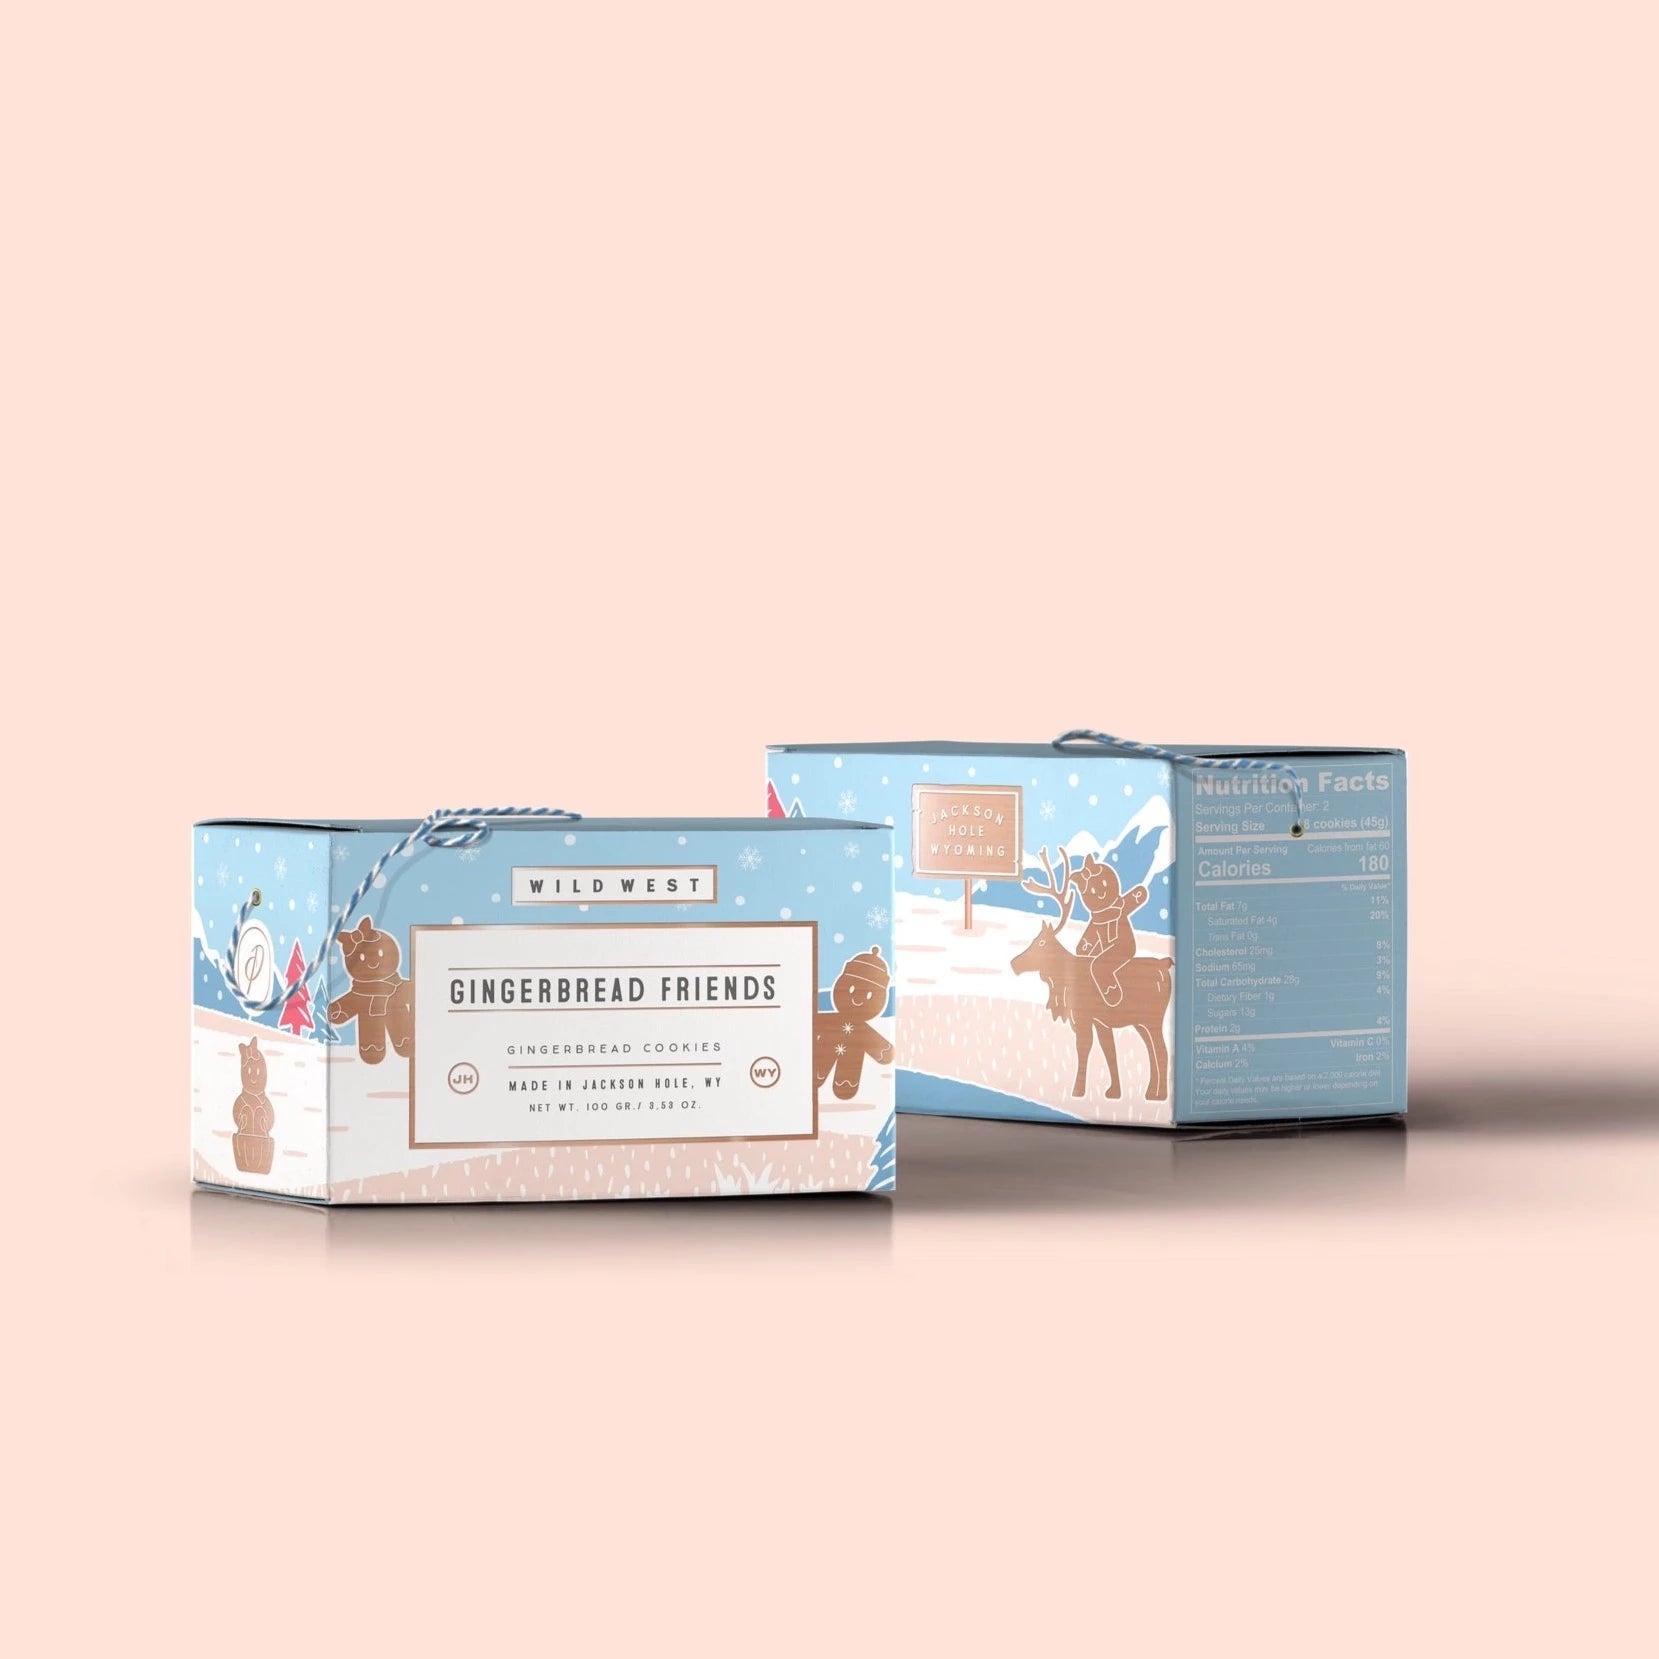 Pastel blue and pink box with gingerbread figures illustrated on it. Box has blue and white string at the top to carry the box. Box has text on the from and side panel.